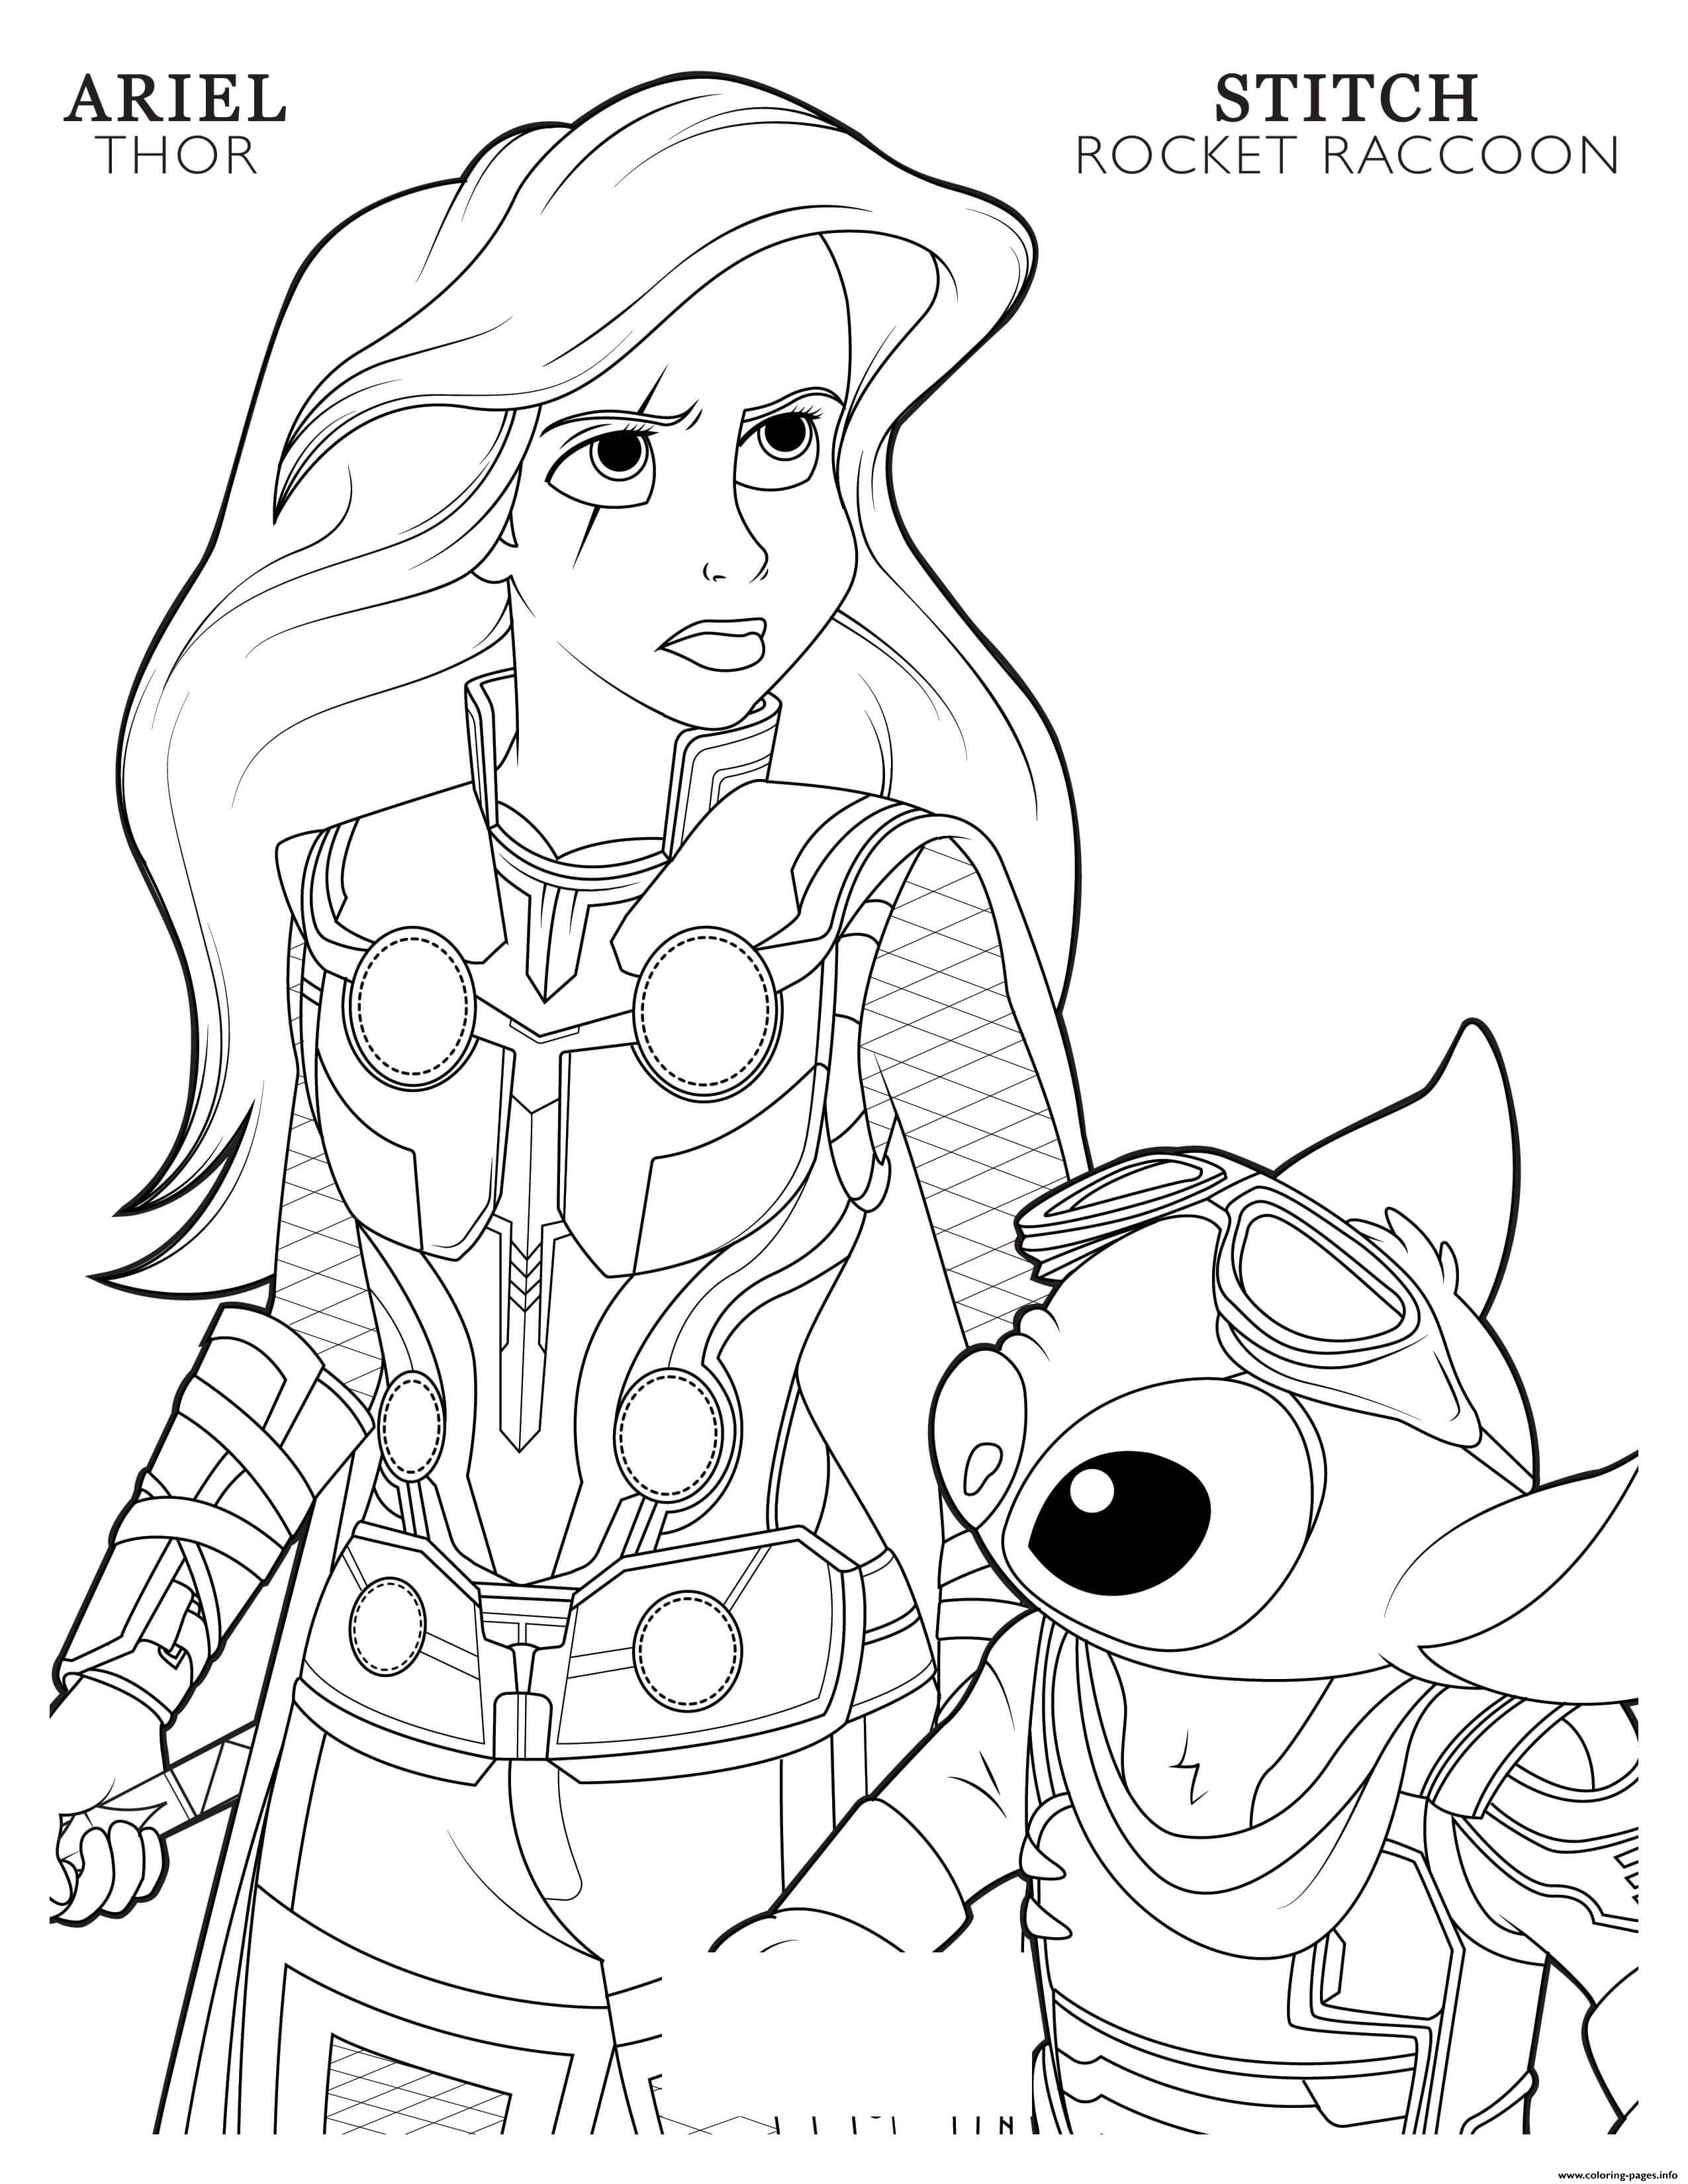 Thor Ariel And Rocket Raccoon Stitch Disney Avengers coloring